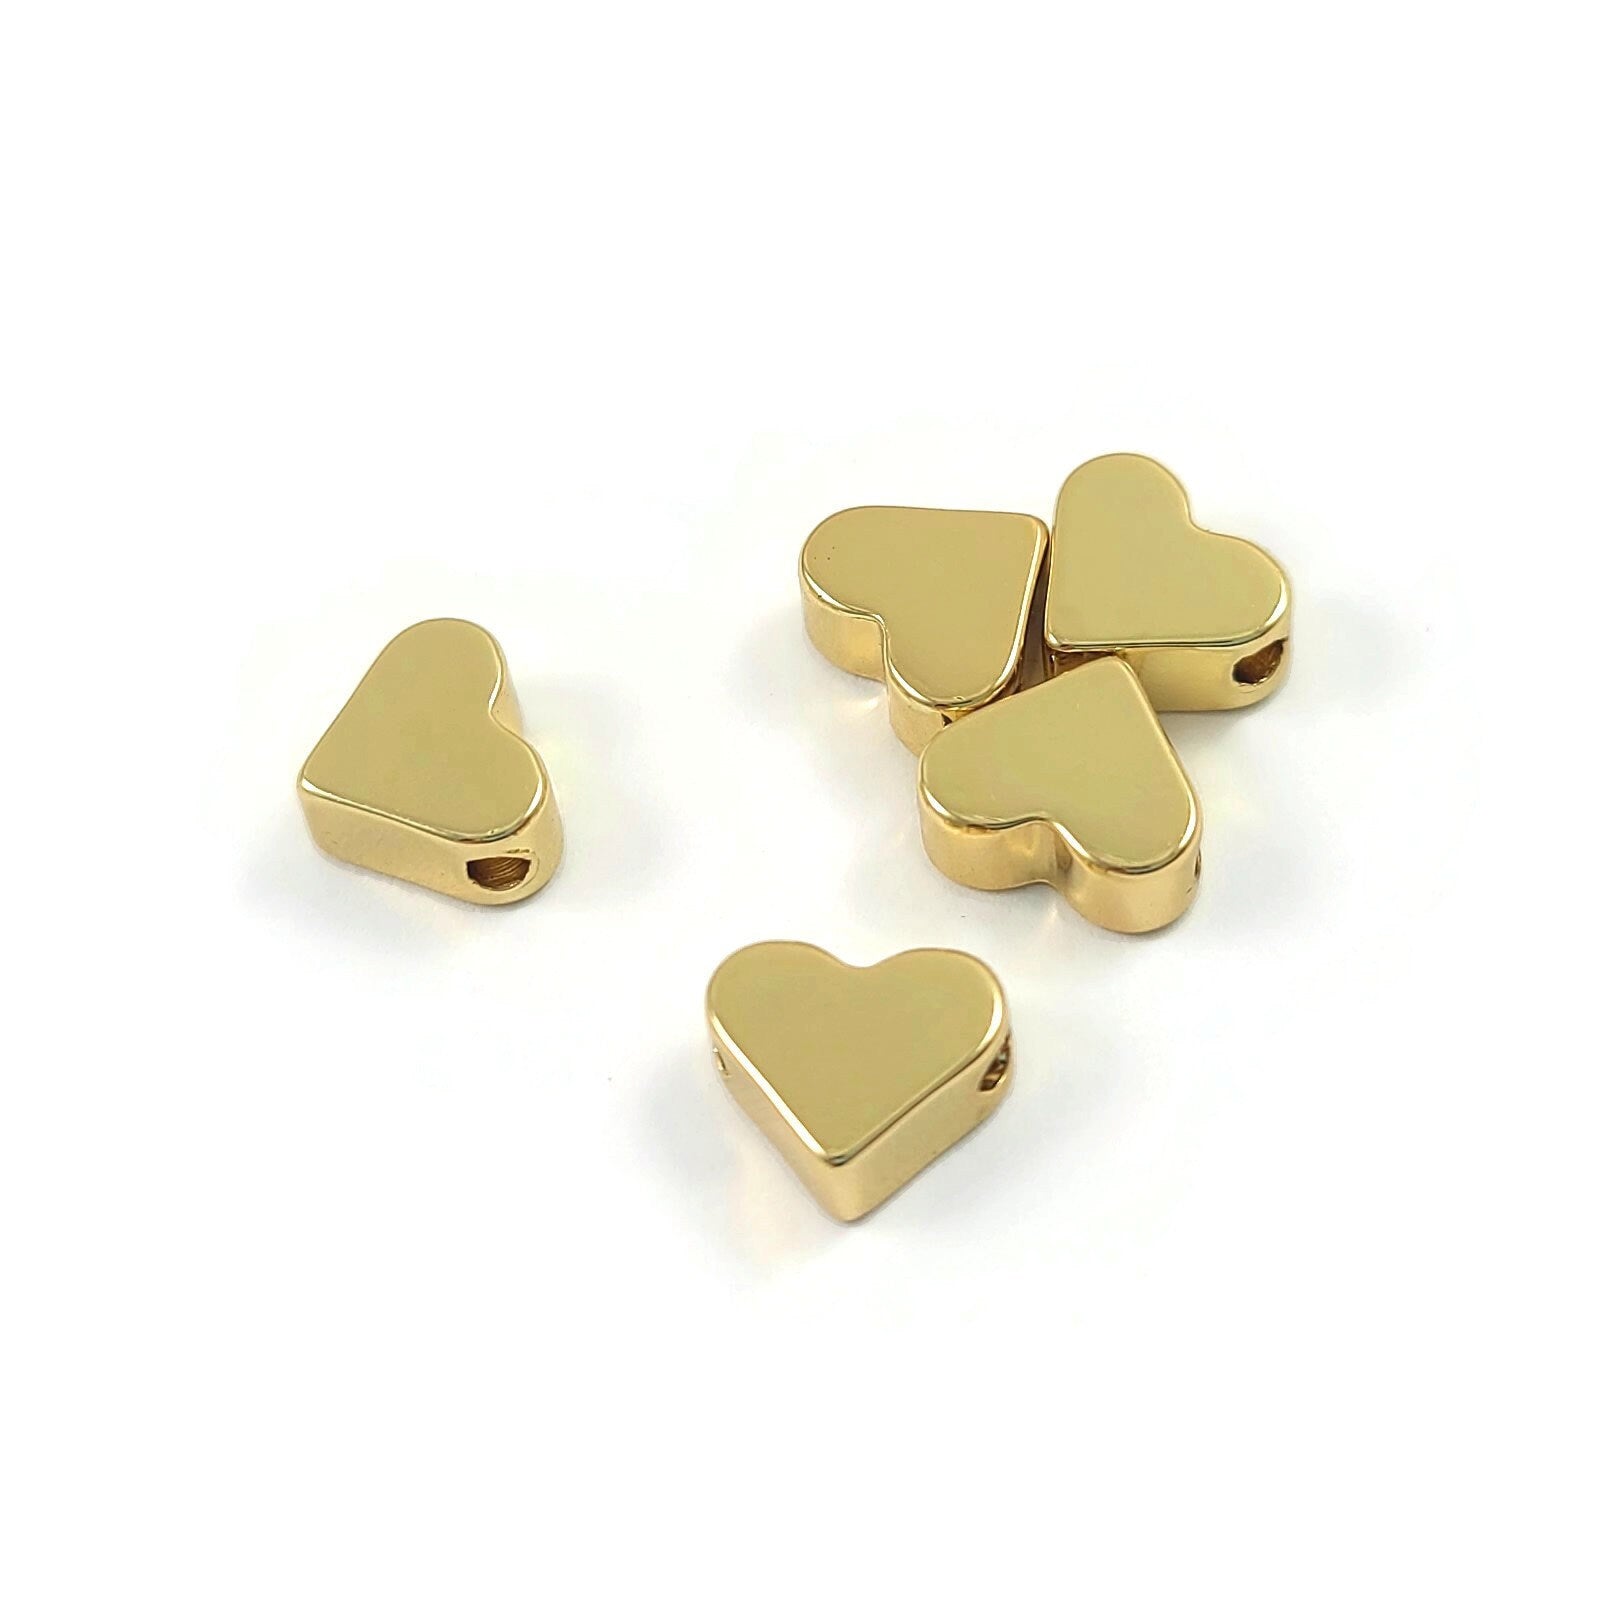 18K real gold plated heart beads, Hypoallergenic nickel free spacers